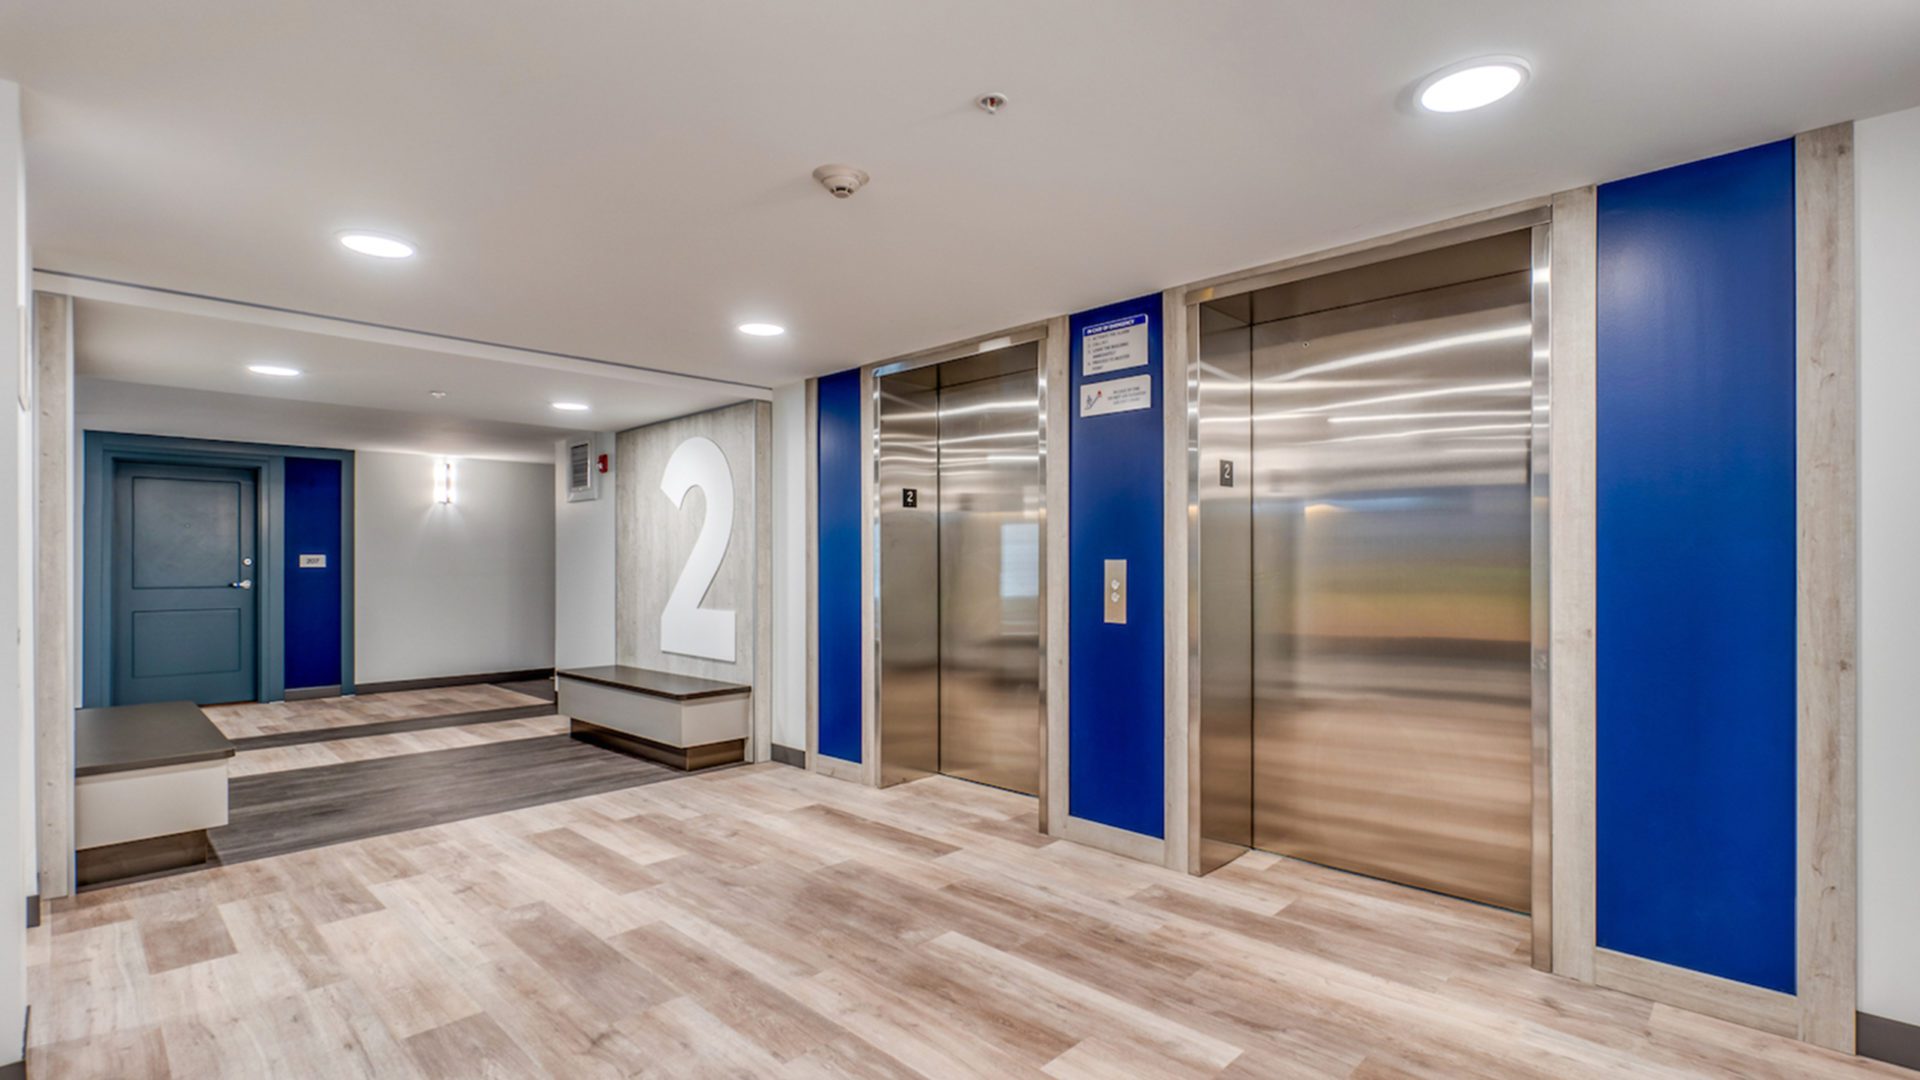 Second floor elevator waiting area at Bishop's Manor residential building